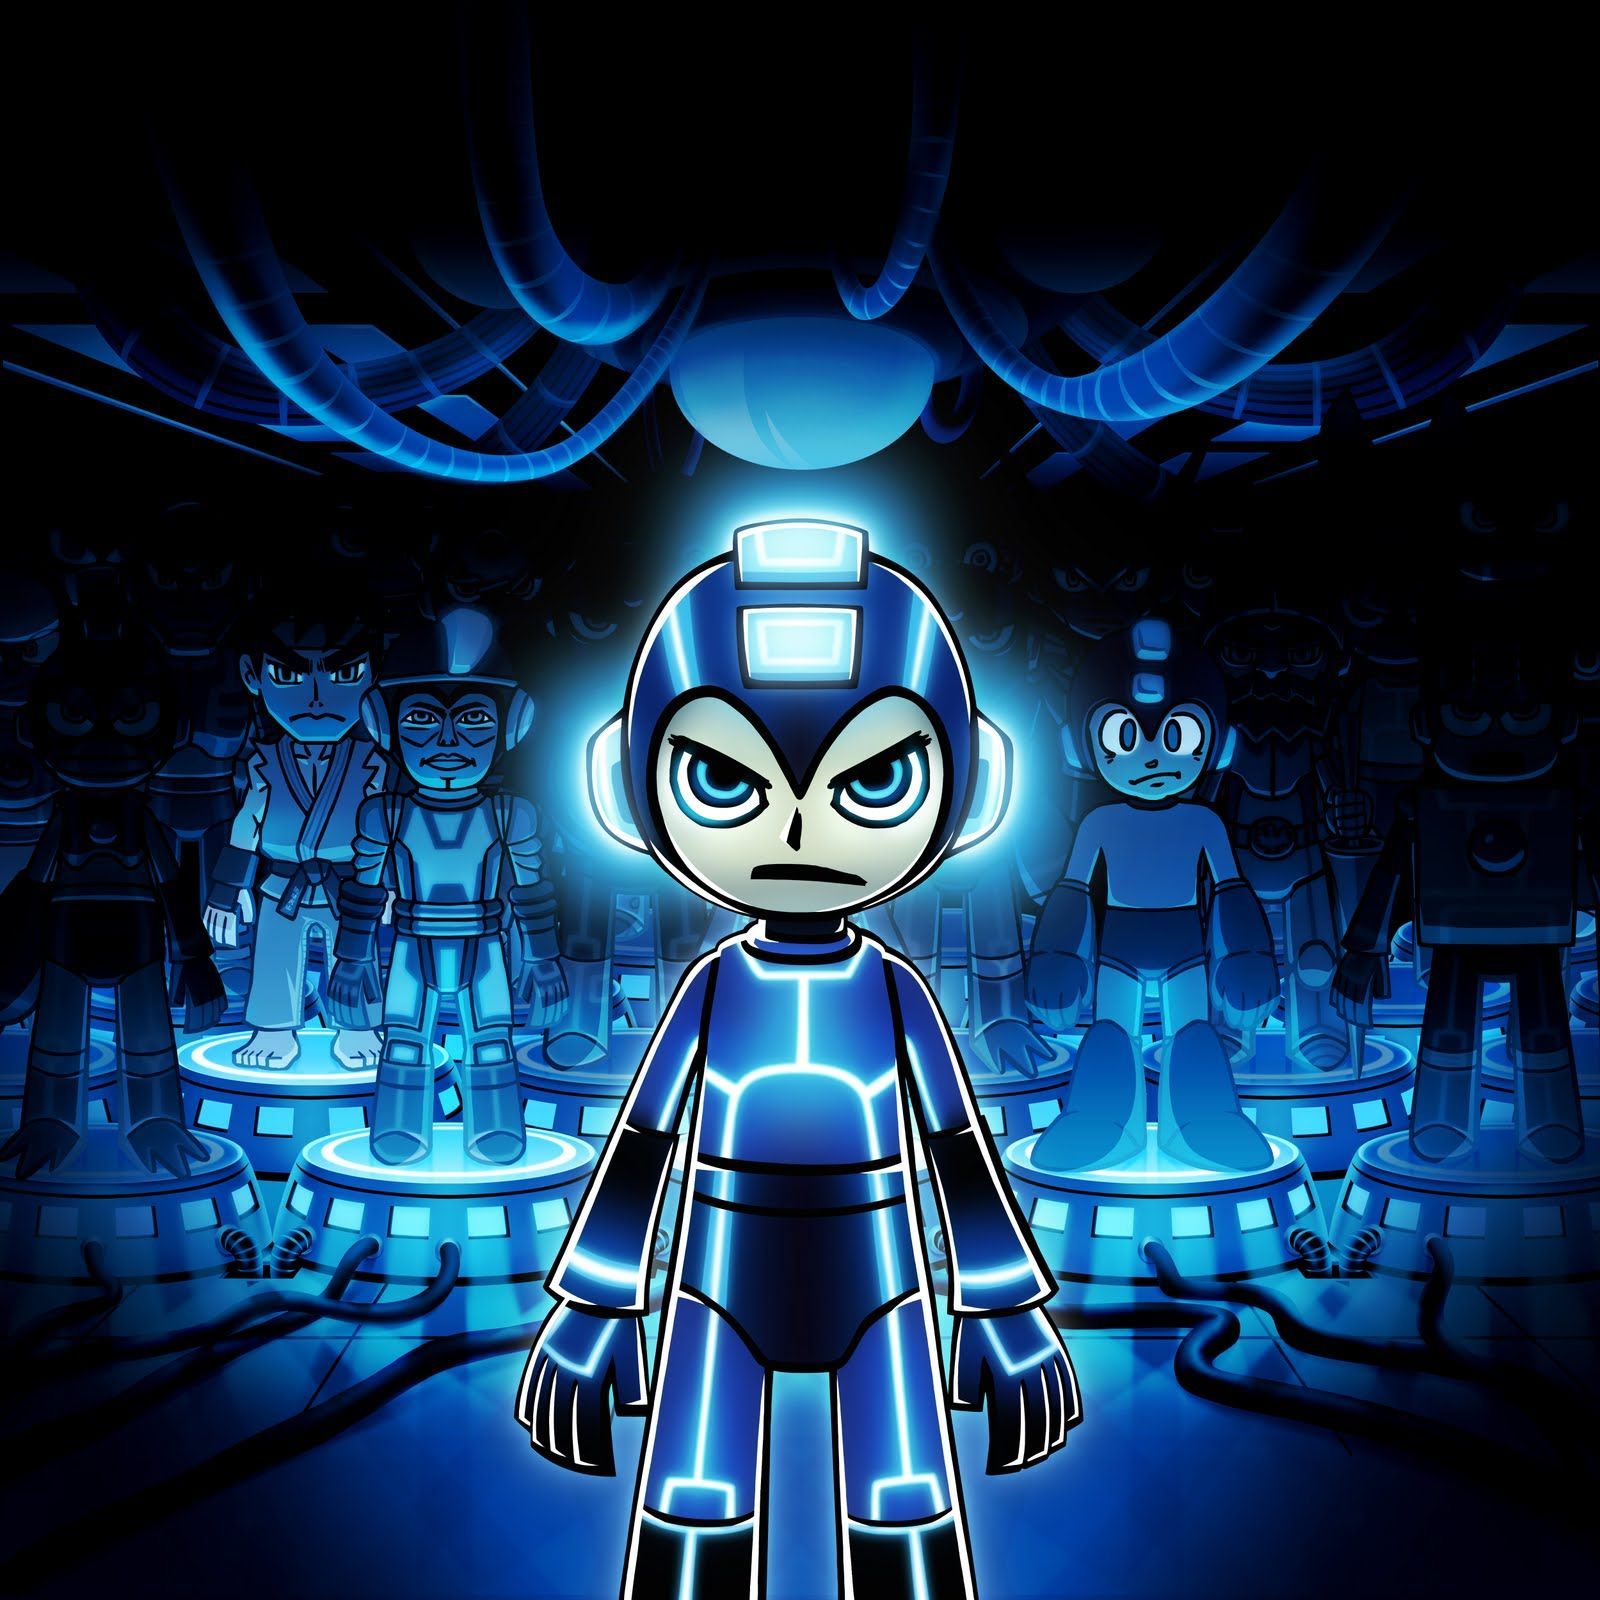 Megaman Wallpaper For Android - Blue Bomber Video Game , HD Wallpaper & Backgrounds